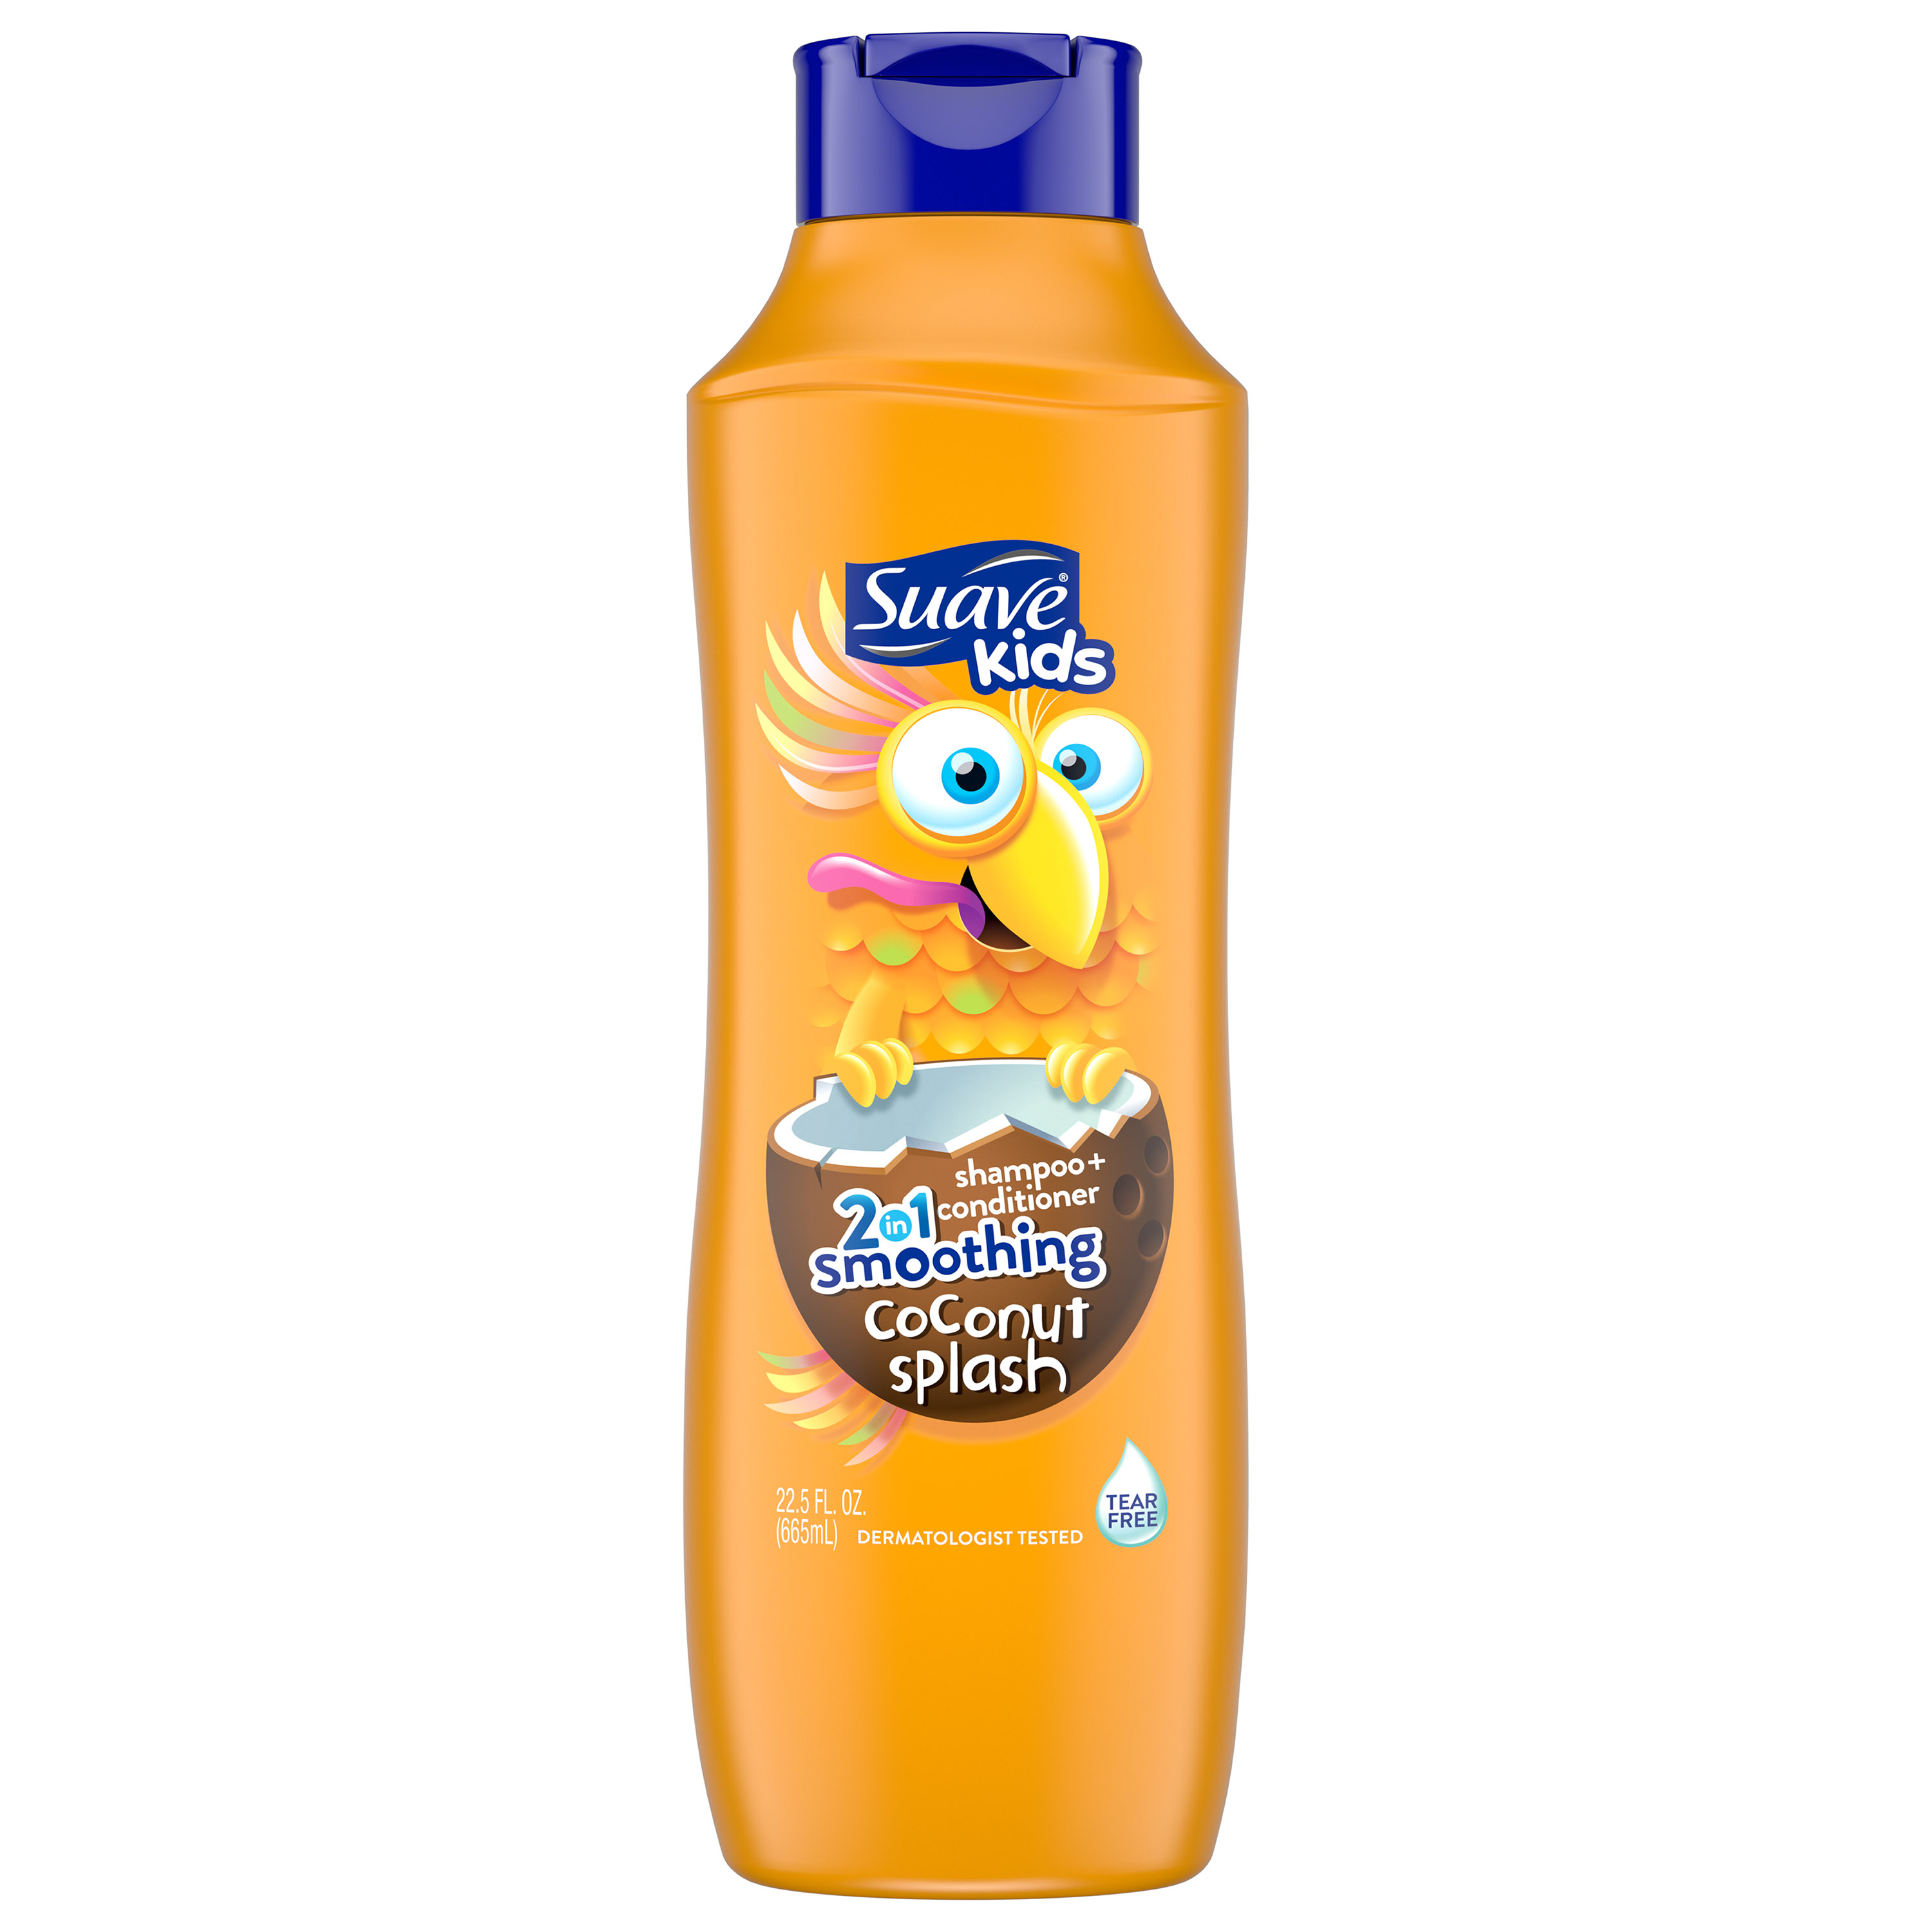 Suave Kids Coconut Smoothers 2 in 1 Shampoo and Conditioner, 22.5 oz - image 1 of 4